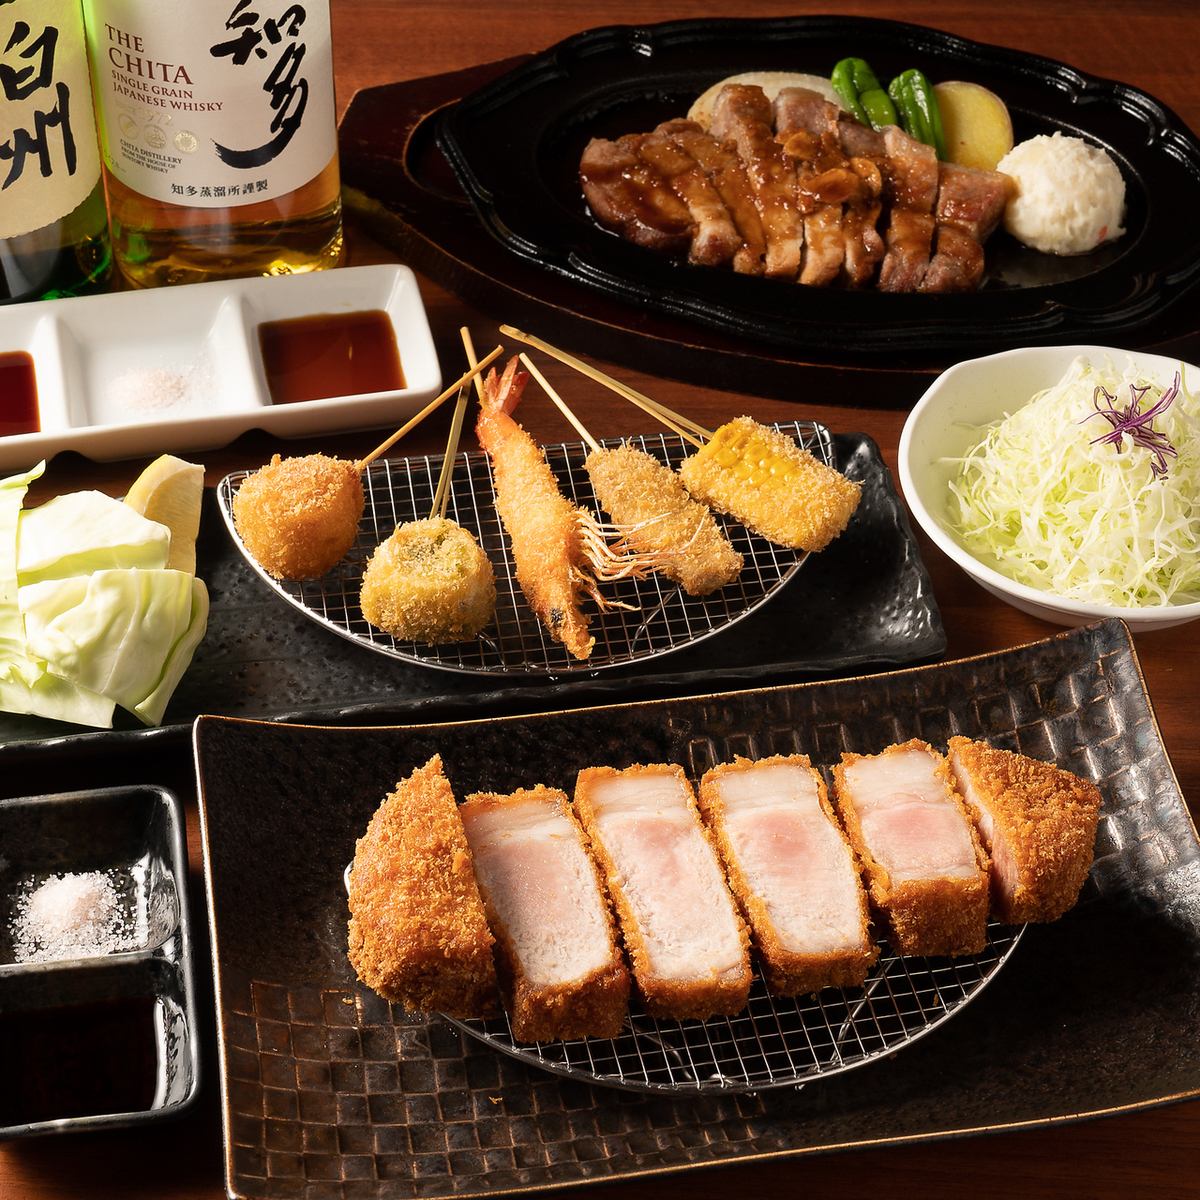 Our prided tonkatsu is both flavorful and voluminous! Enjoy the savory taste of our carefully selected pork!